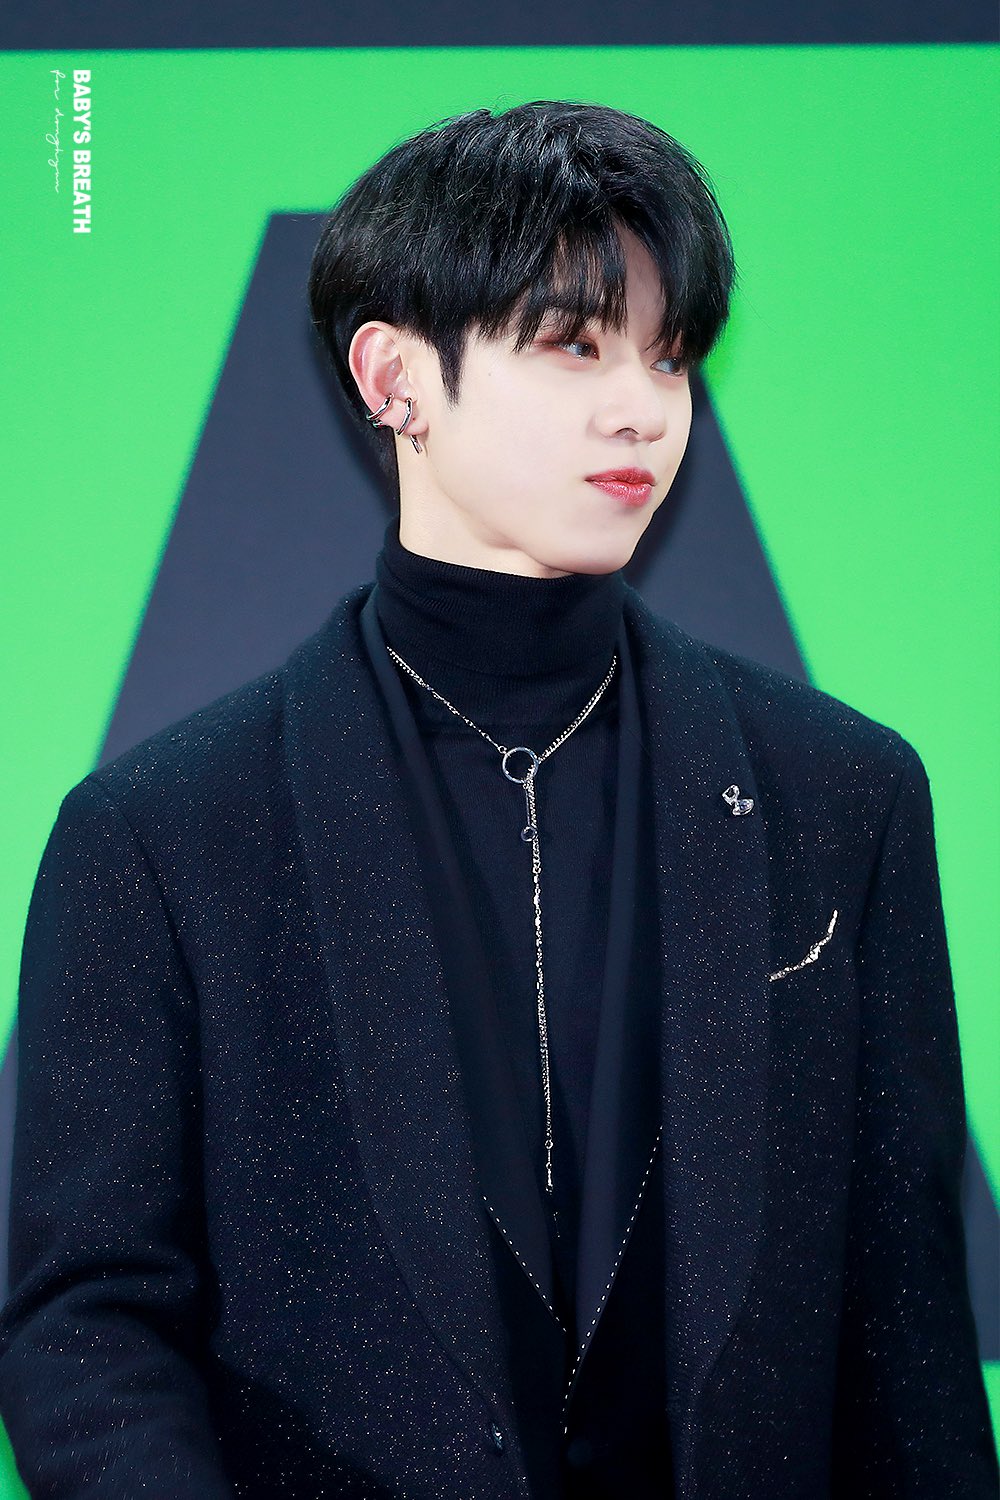 AB6IX's Kim Donghyun Goes Viral For For His Sparkling Visuals At The ...